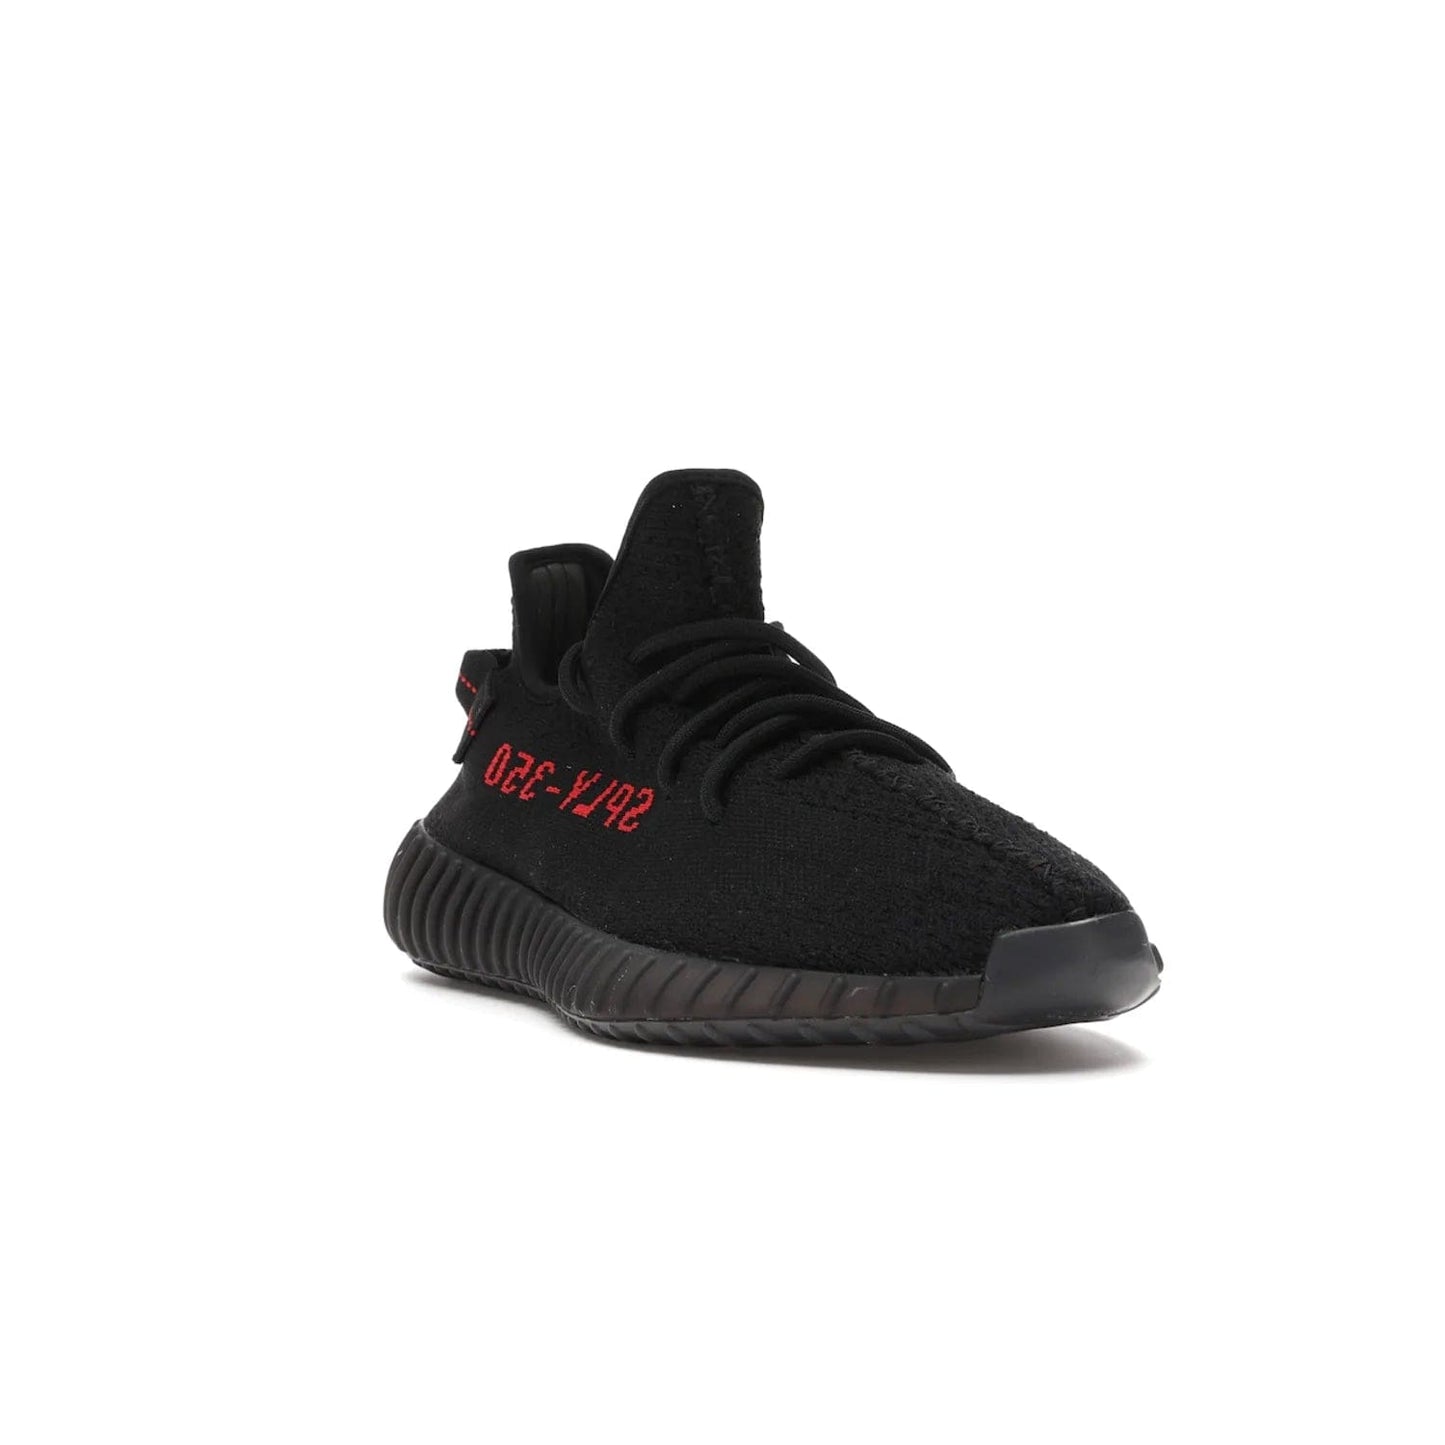 adidas Yeezy Boost 350 V2 Black Red (2017/2020) - Image 7 - Only at www.BallersClubKickz.com - Adidas Yeezy Boost 350 V2 Black Red: a classic colorway featuring black Primeknit upper, BOOST cushioning system, and iconic "SPLY-350" text. Released in 2017 for a retail price of $220.